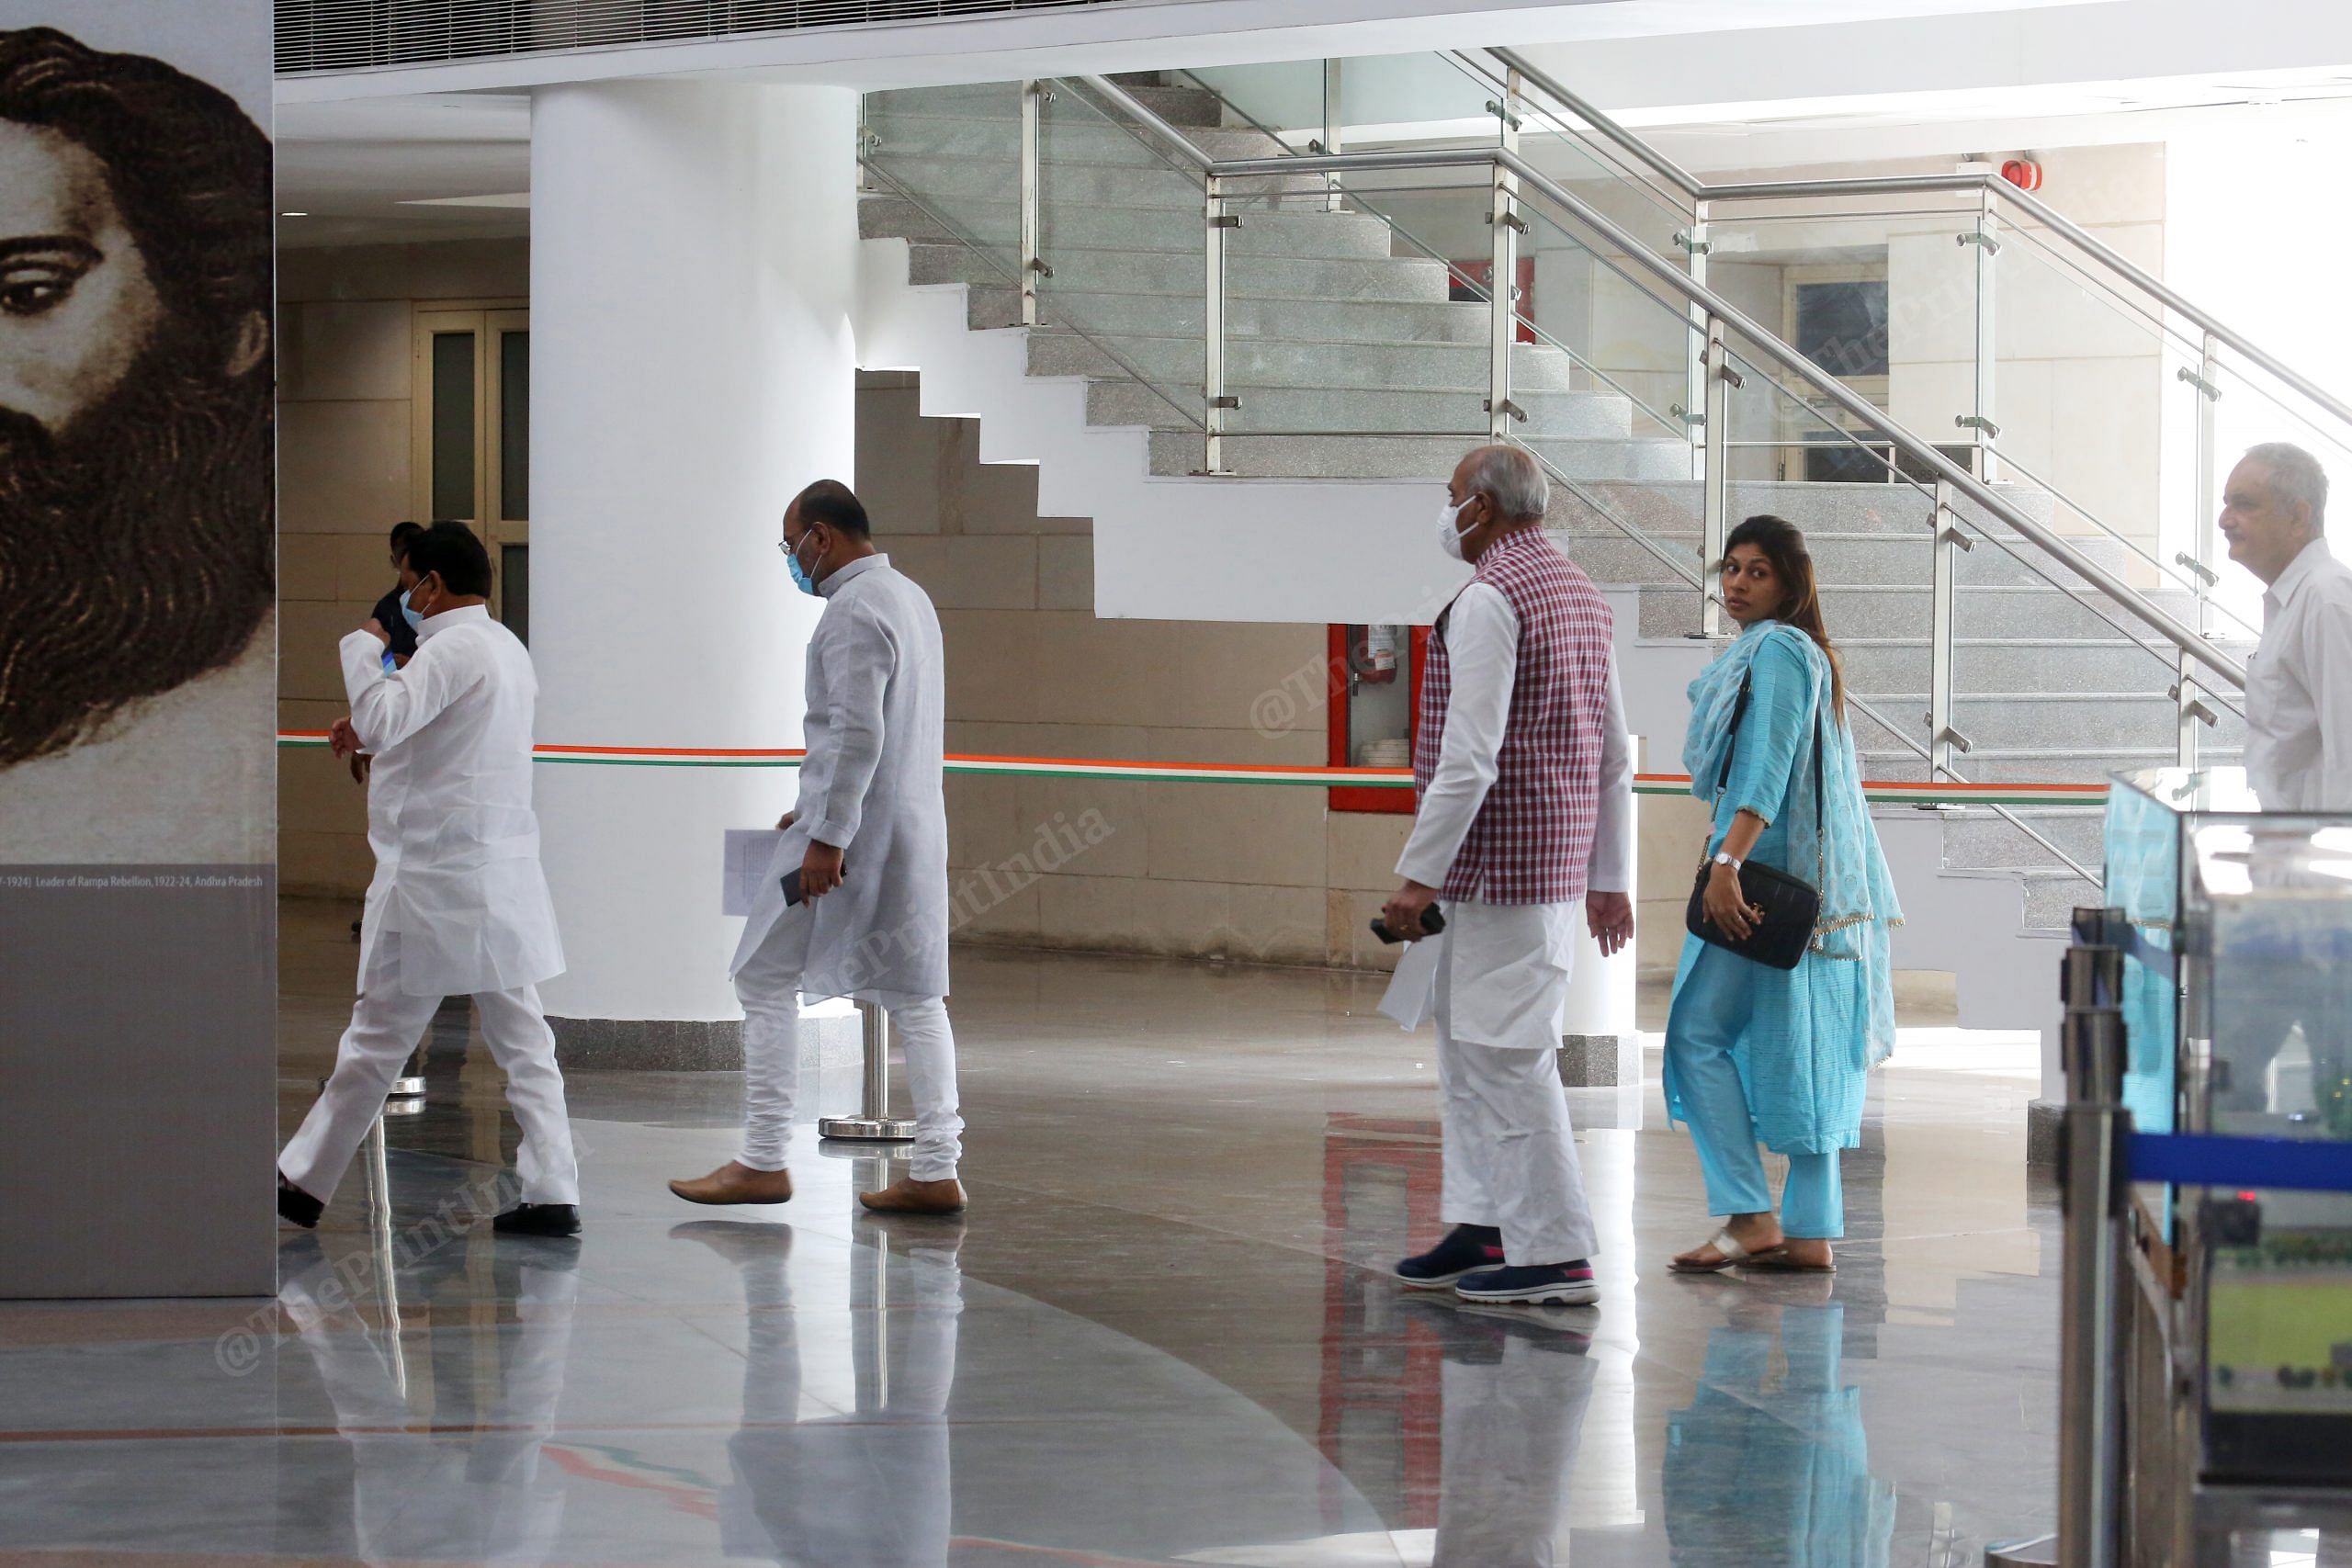 BJP MP's rushing towards the Ambedkar Bhavan to attend BJP Parliamentary Party meeting while PM and Party President were sitting inside | Photo: Praveen Jain | ThePrint 